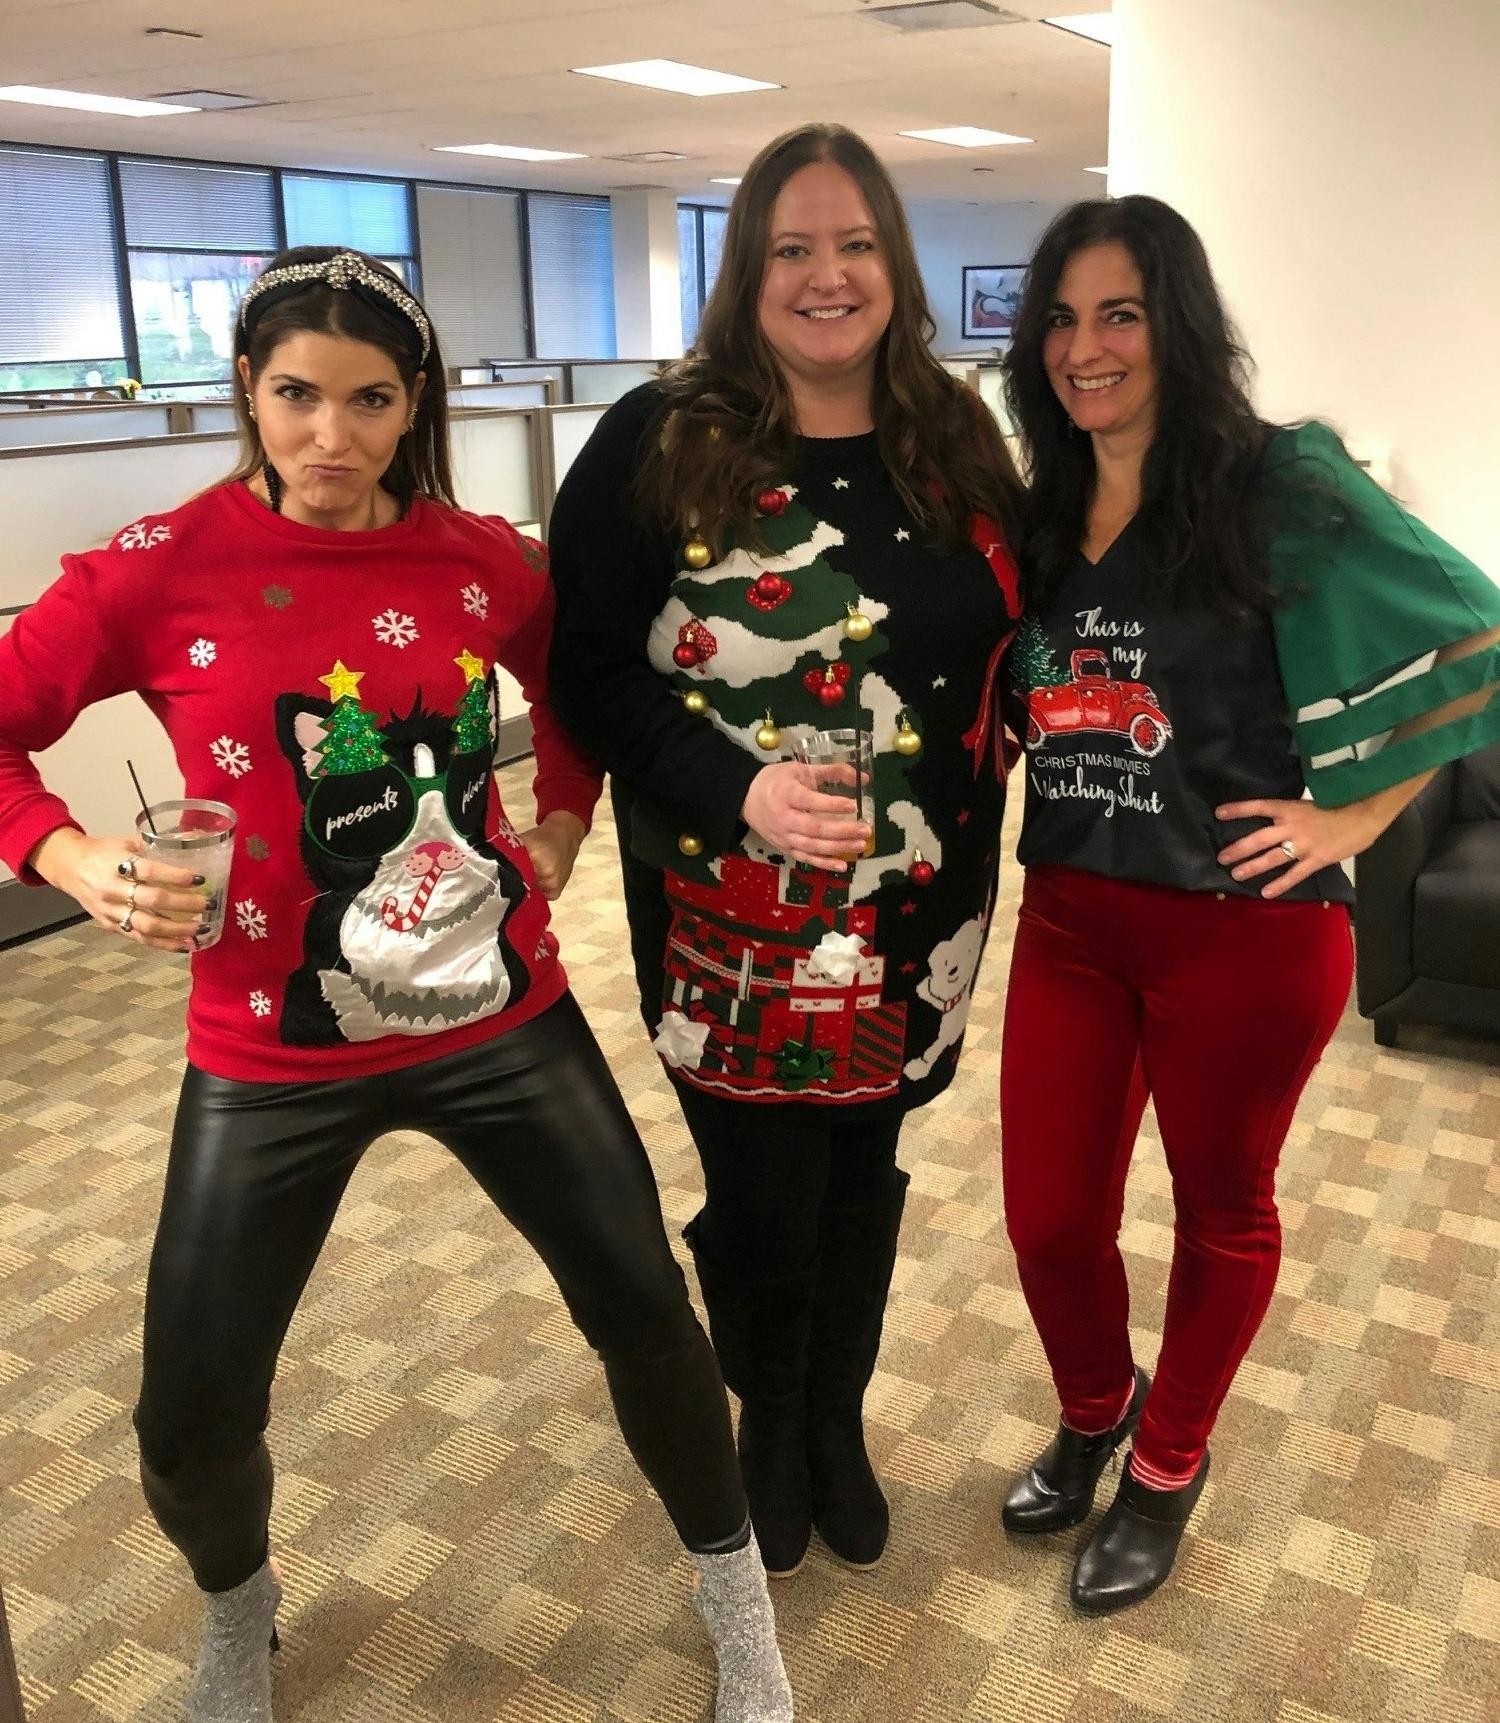 Contestants of an ugly sweater contest during an office holiday party